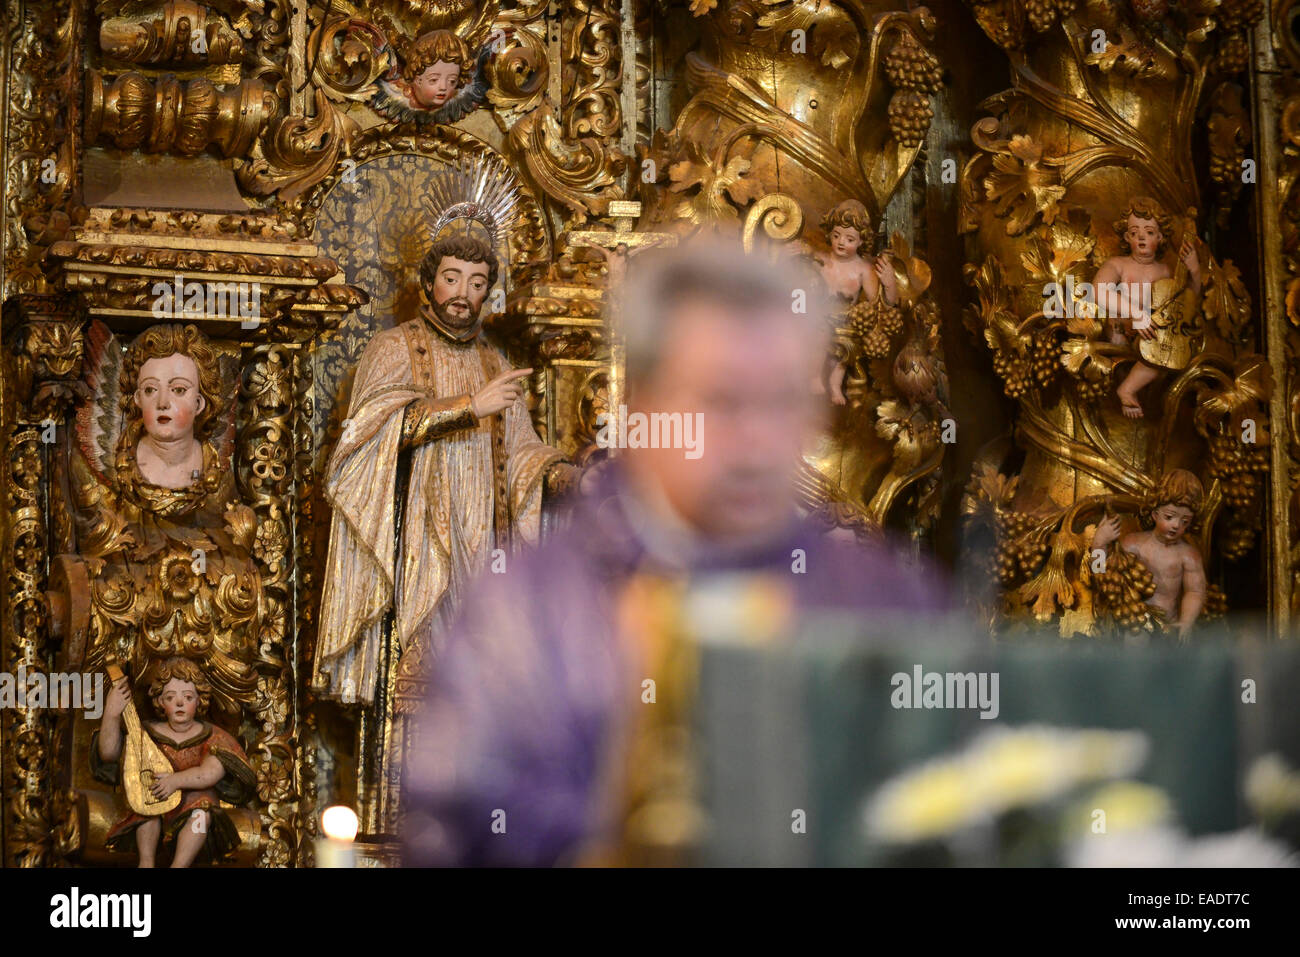 Statues of saints and angels on an ornate altar behind a catholic priest celebrating mass Stock Photo